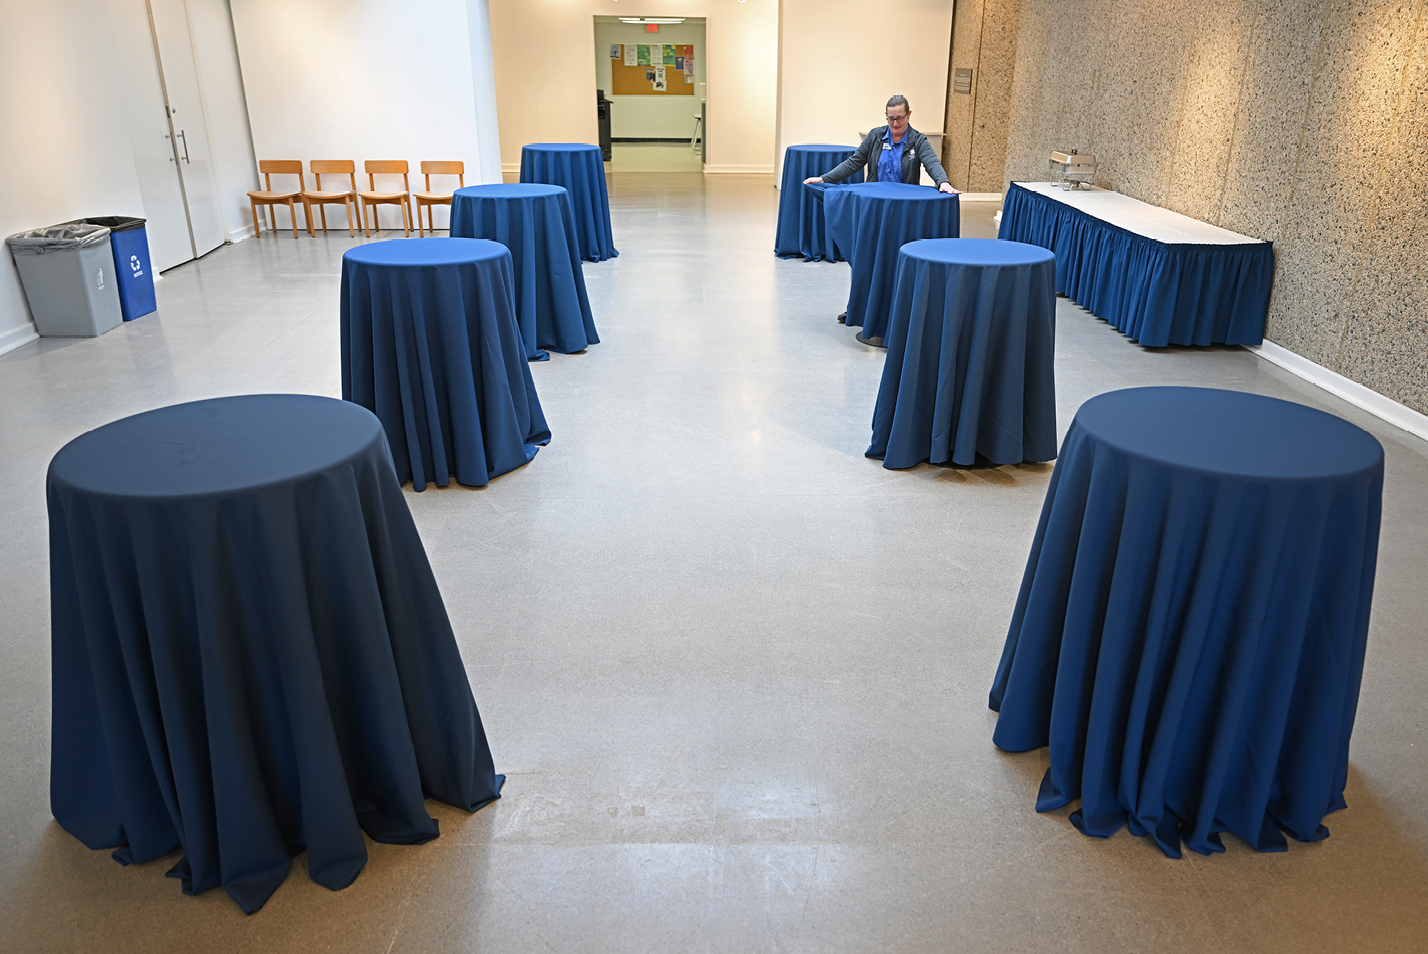 Catering assistant Caroline Ball sets up tables in the Joanne Toor Cummings Gallery.